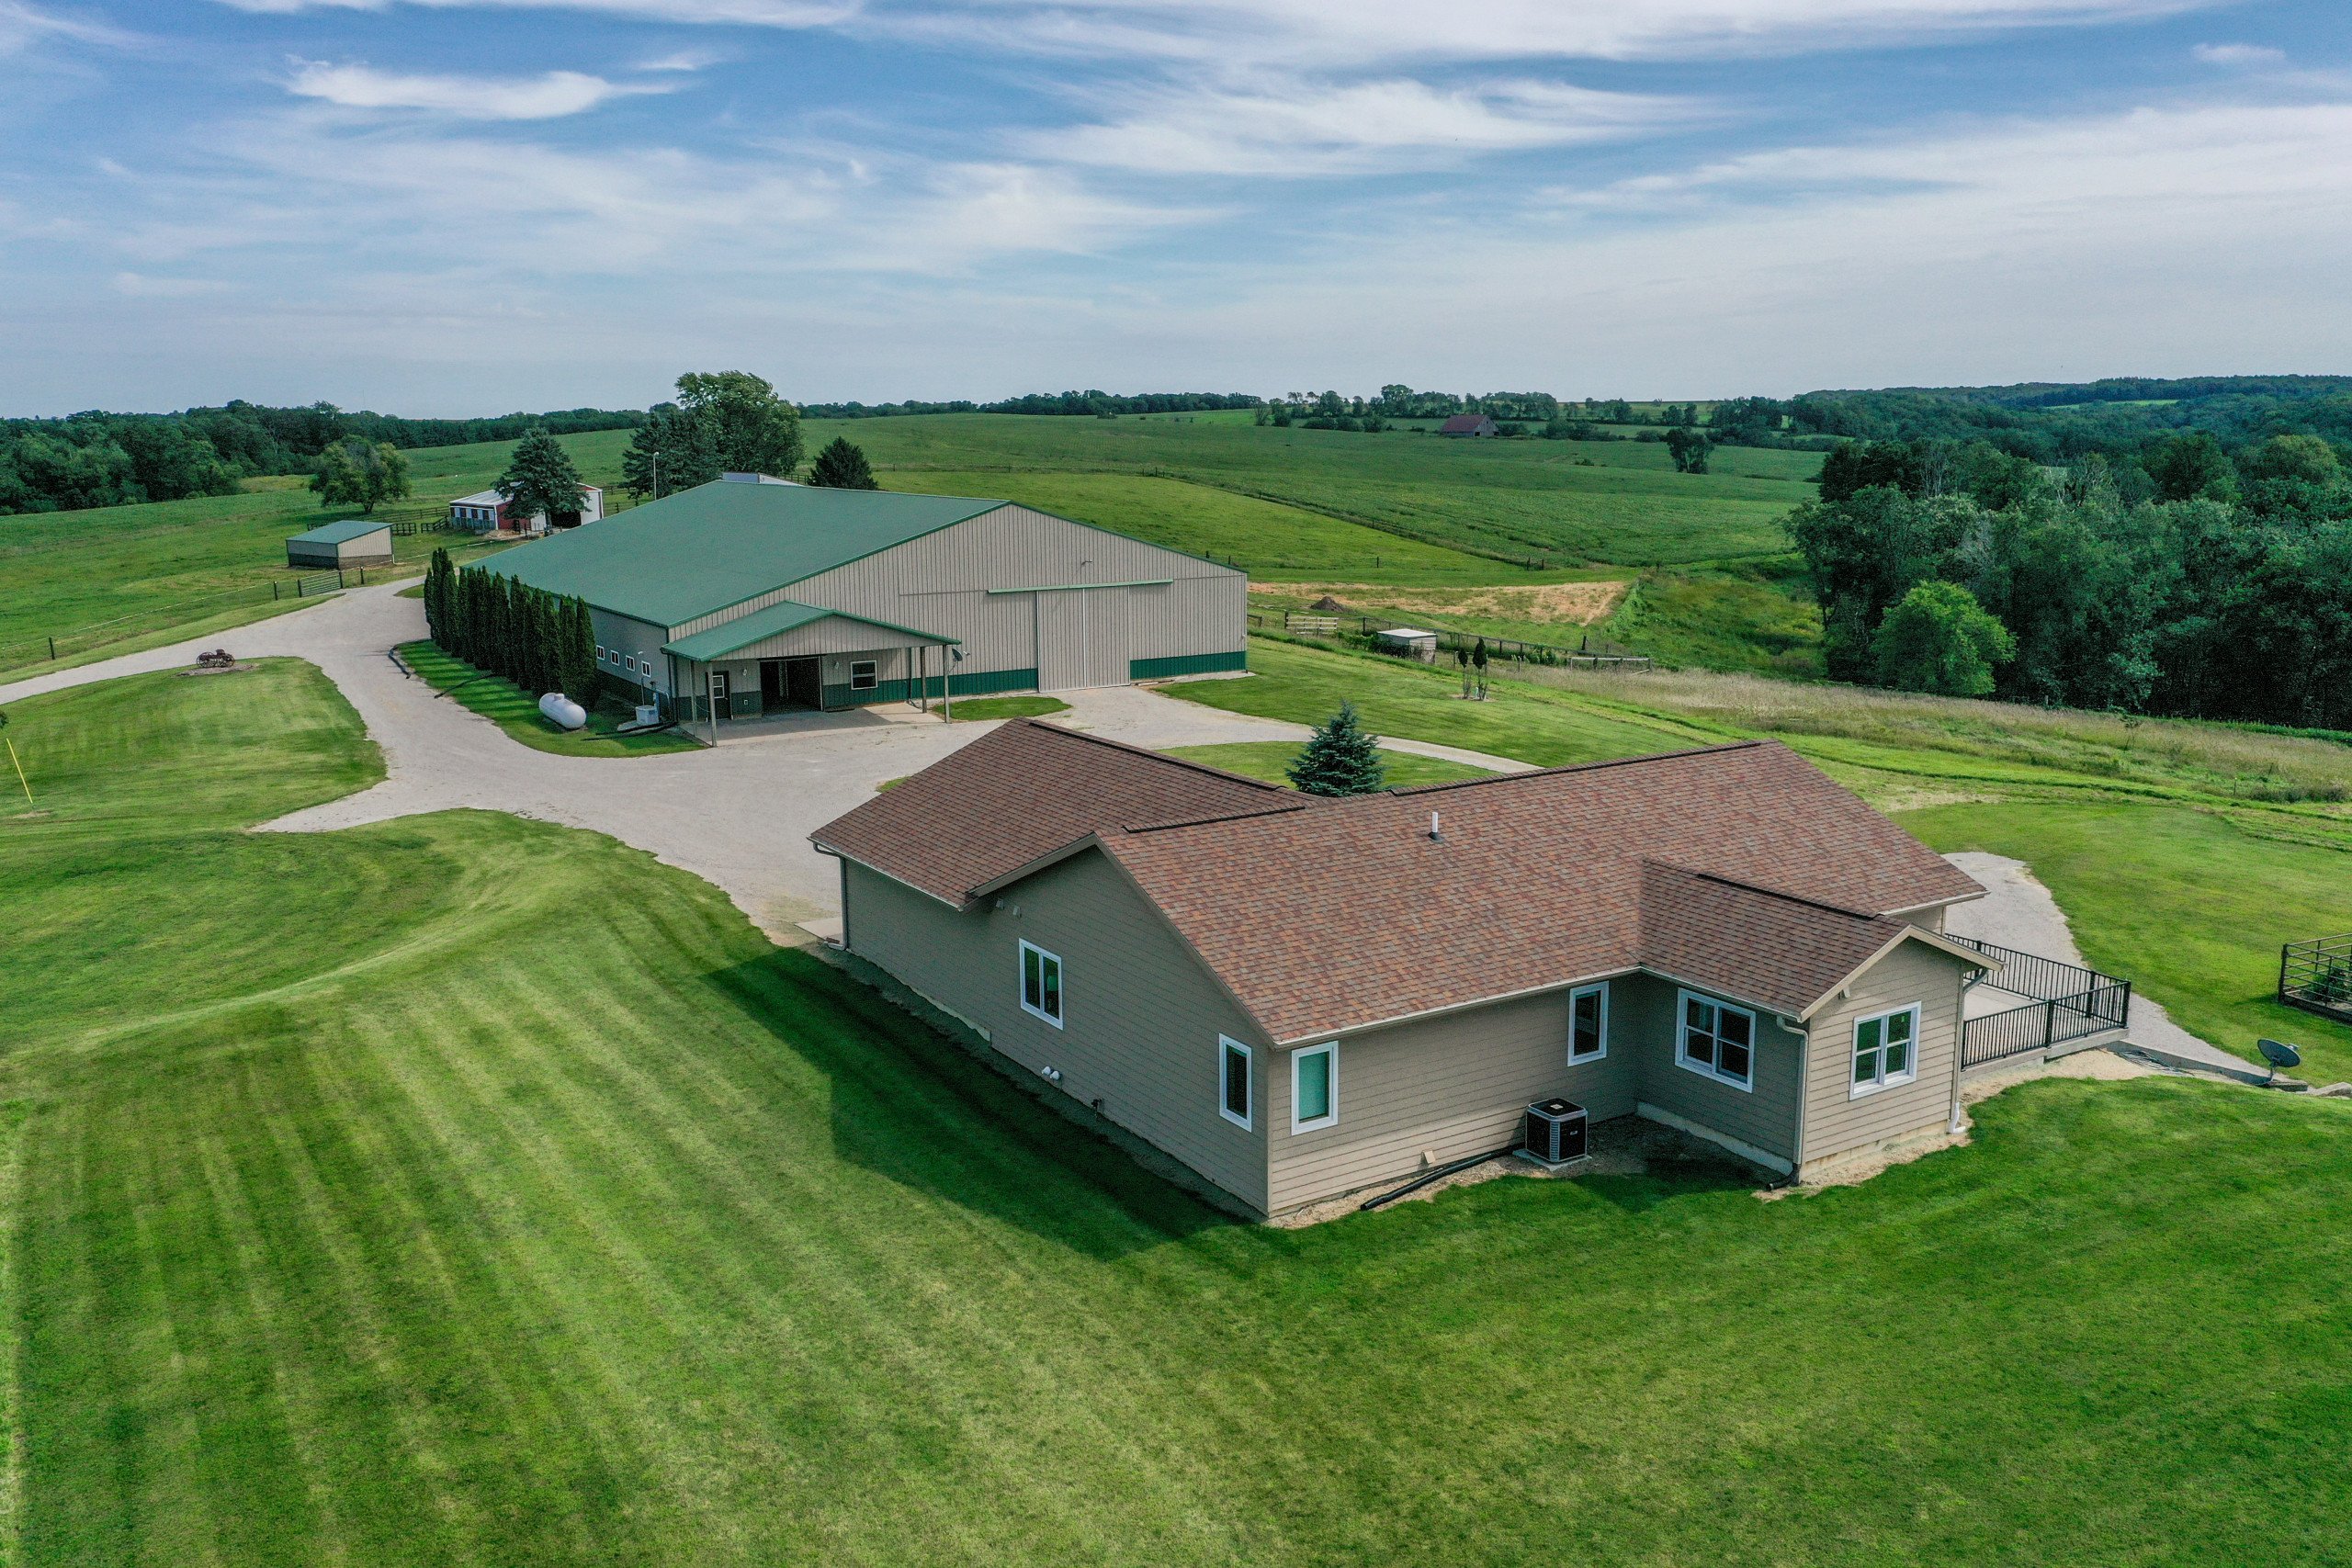 residential-land-grant-county-wisconsin-0-acres-listing-number-16393-DJI_0284-2.jpg